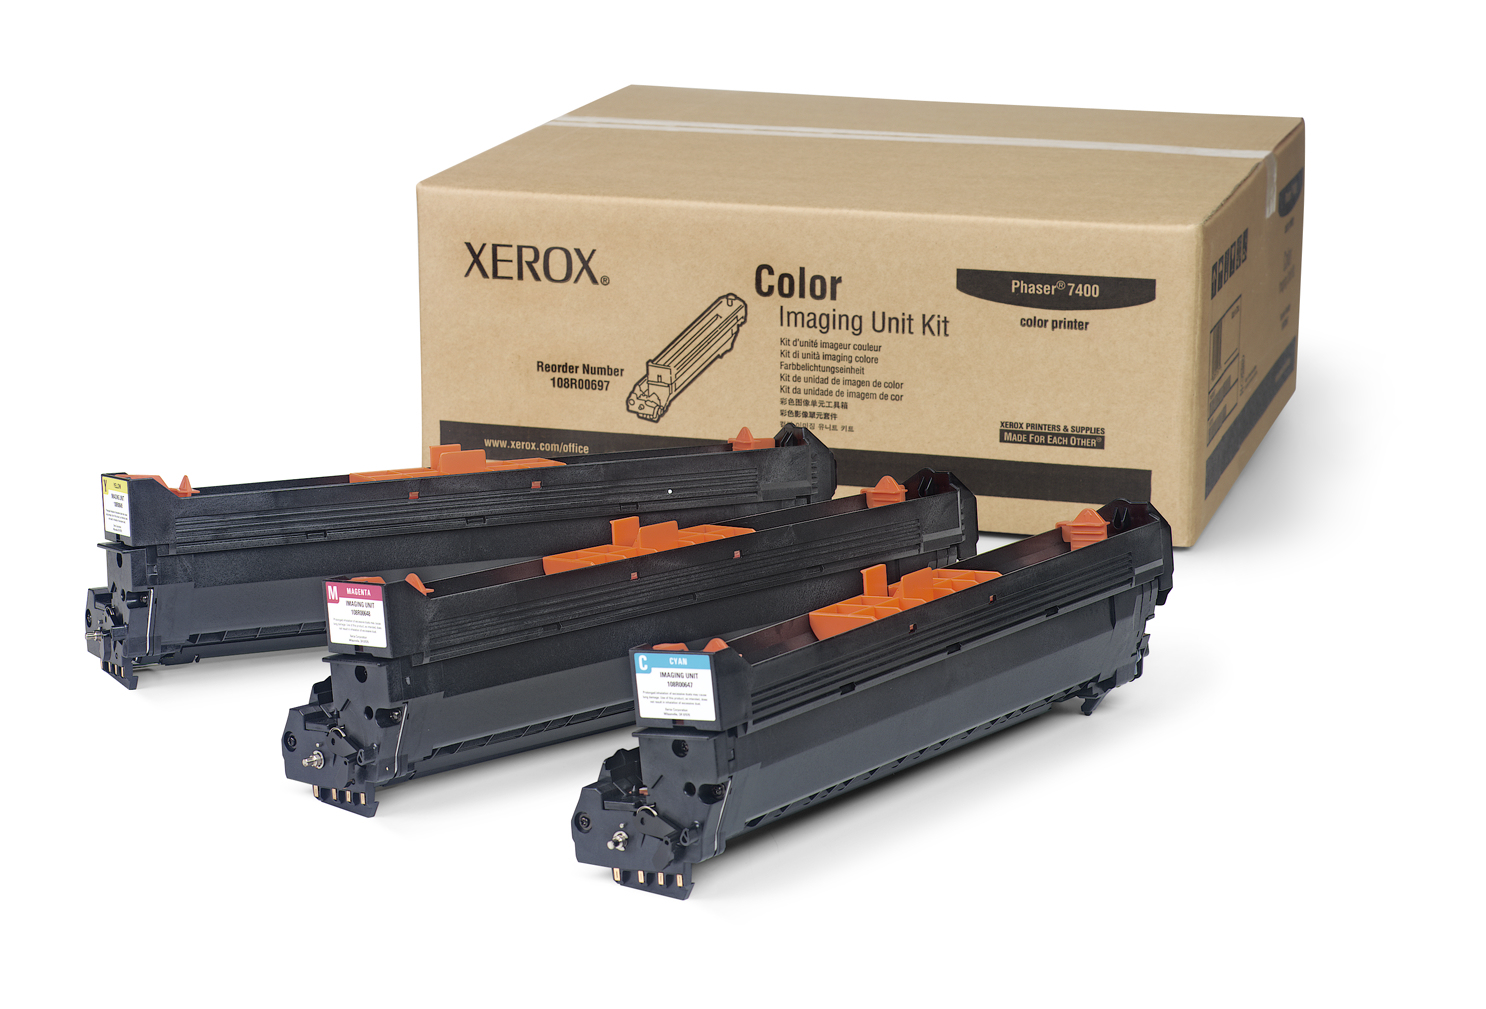 Xerox Phaser 7400 Color Imaging Unit Kit